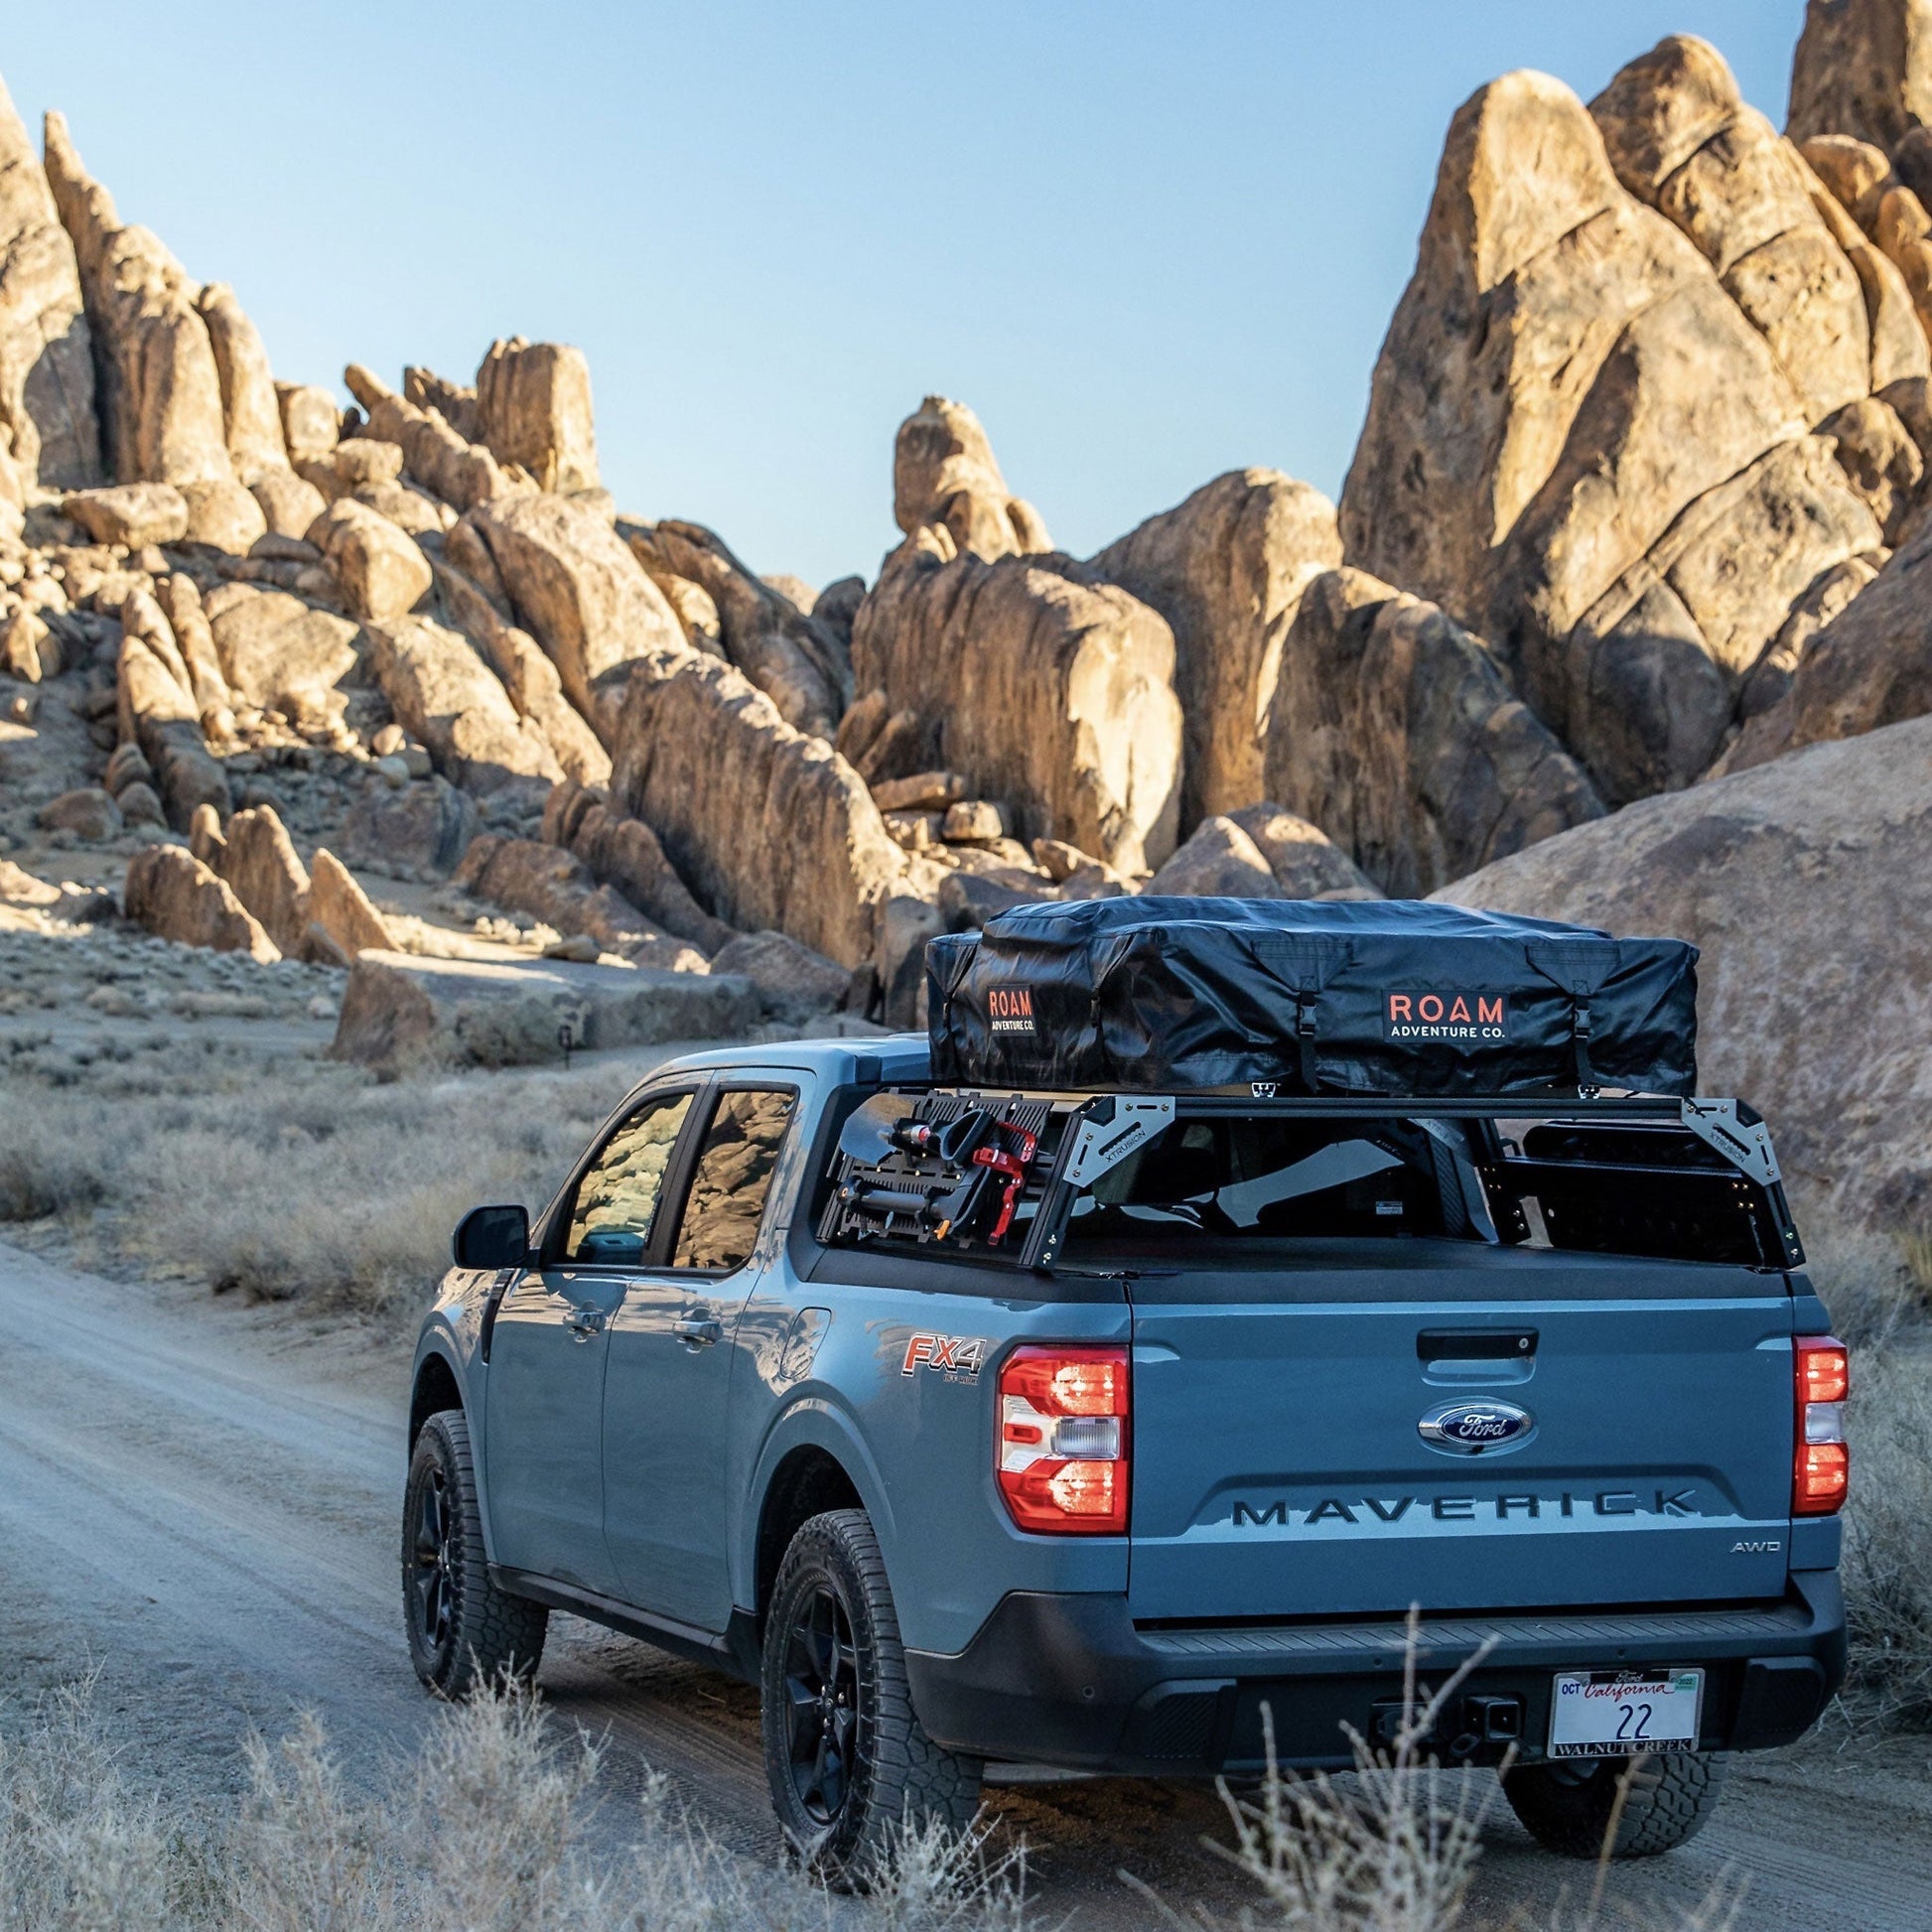 Ford Maverick FX4 with extrusion overland bed rack loaded with RTT, Shovel, ax, molle panels